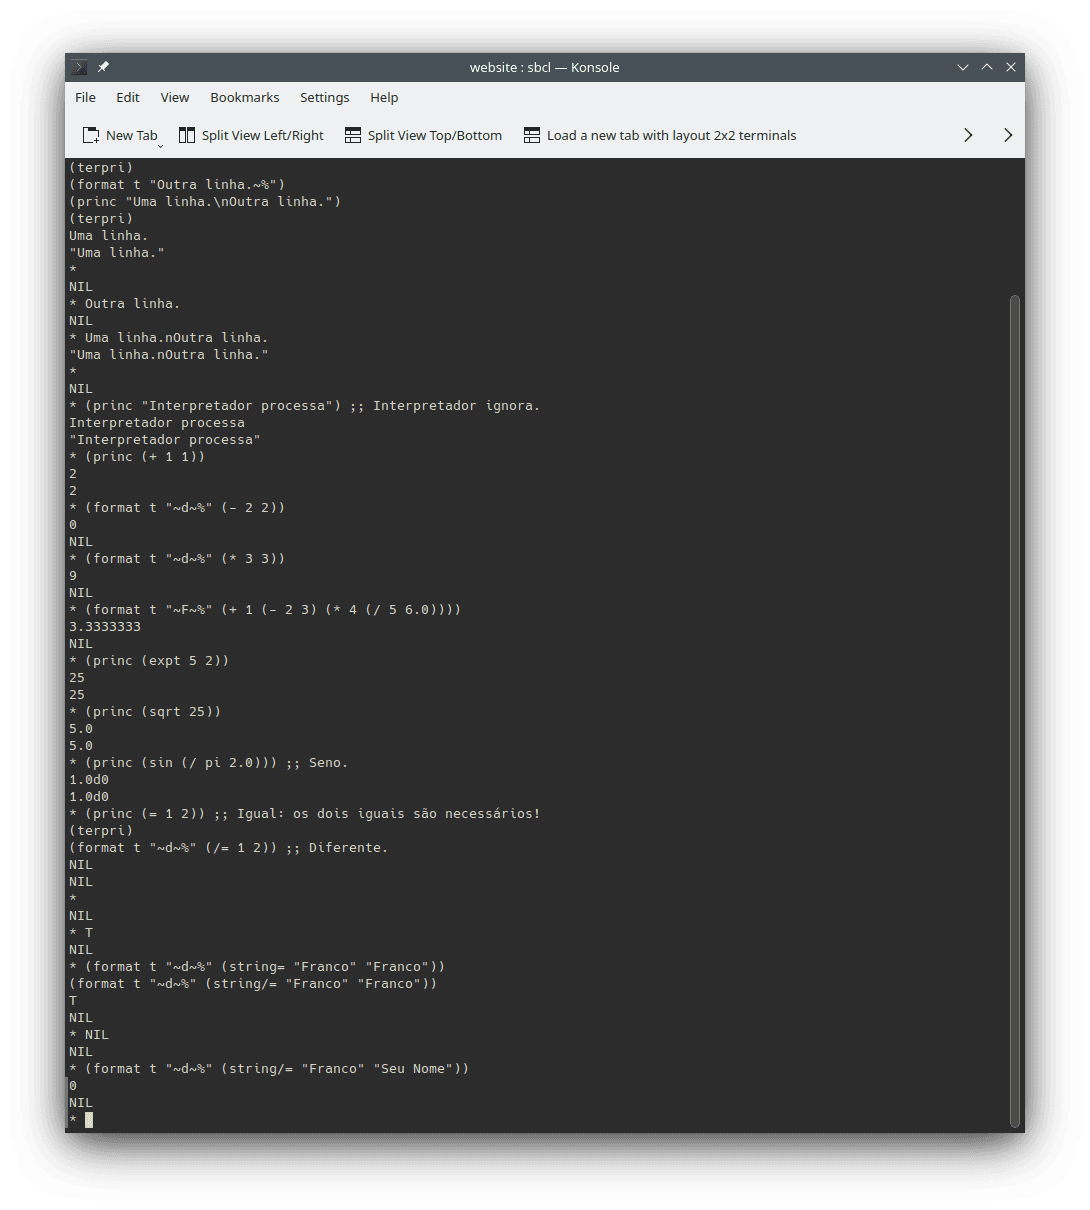 Examples of use and outputs of code snippets described in this section using the `sbcl` interpreter for LISP on the command line.